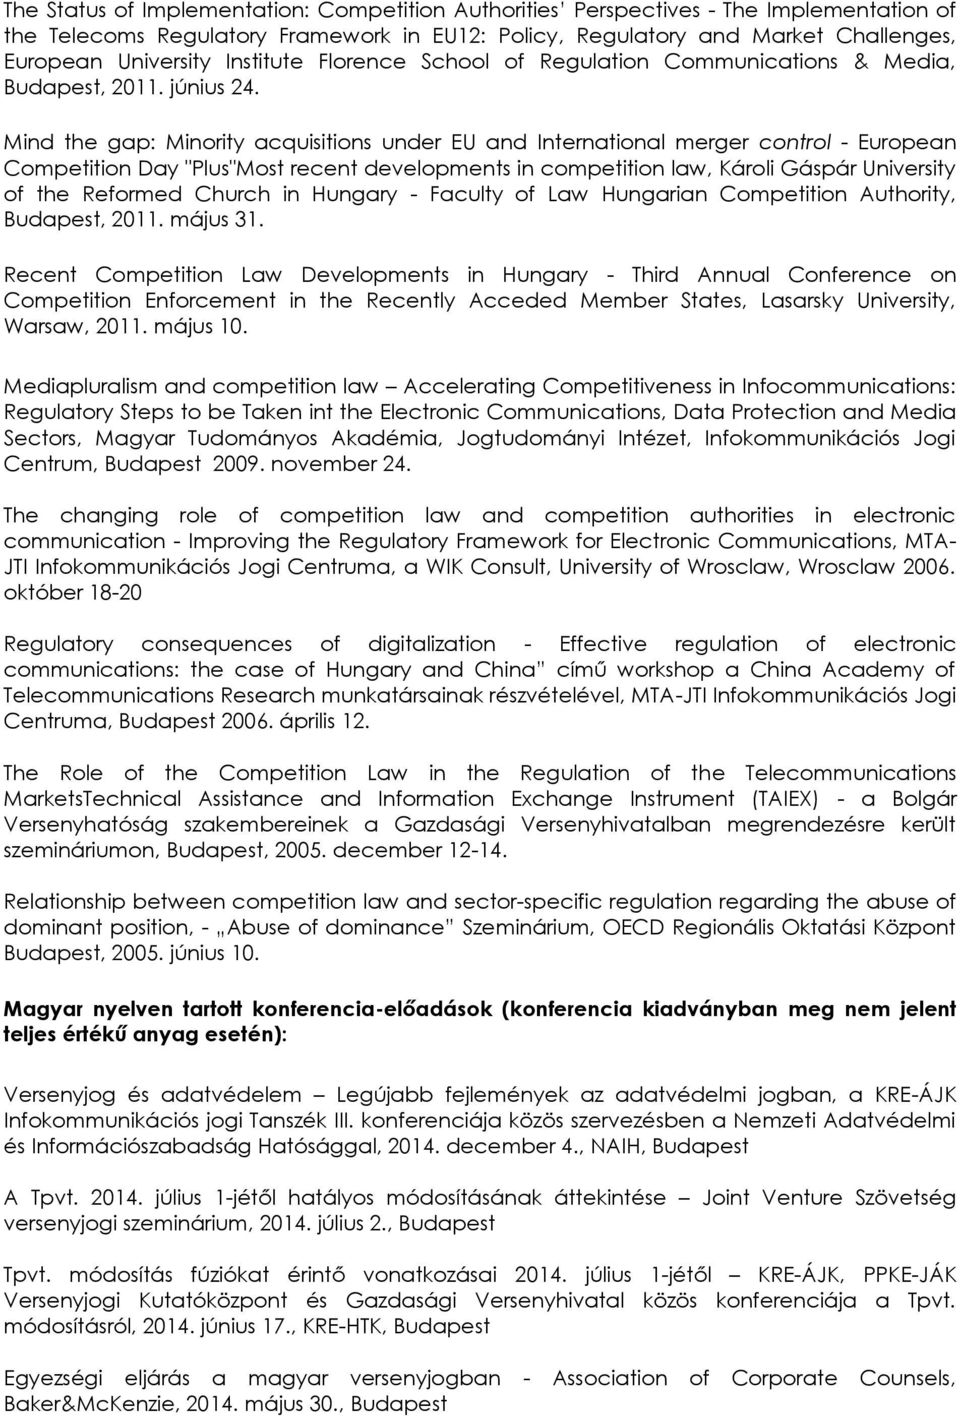 Mind the gap: Minority acquisitions under EU and International merger control - European Competition Day "Plus"Most recent developments in competition law, Károli Gáspár University of the Reformed